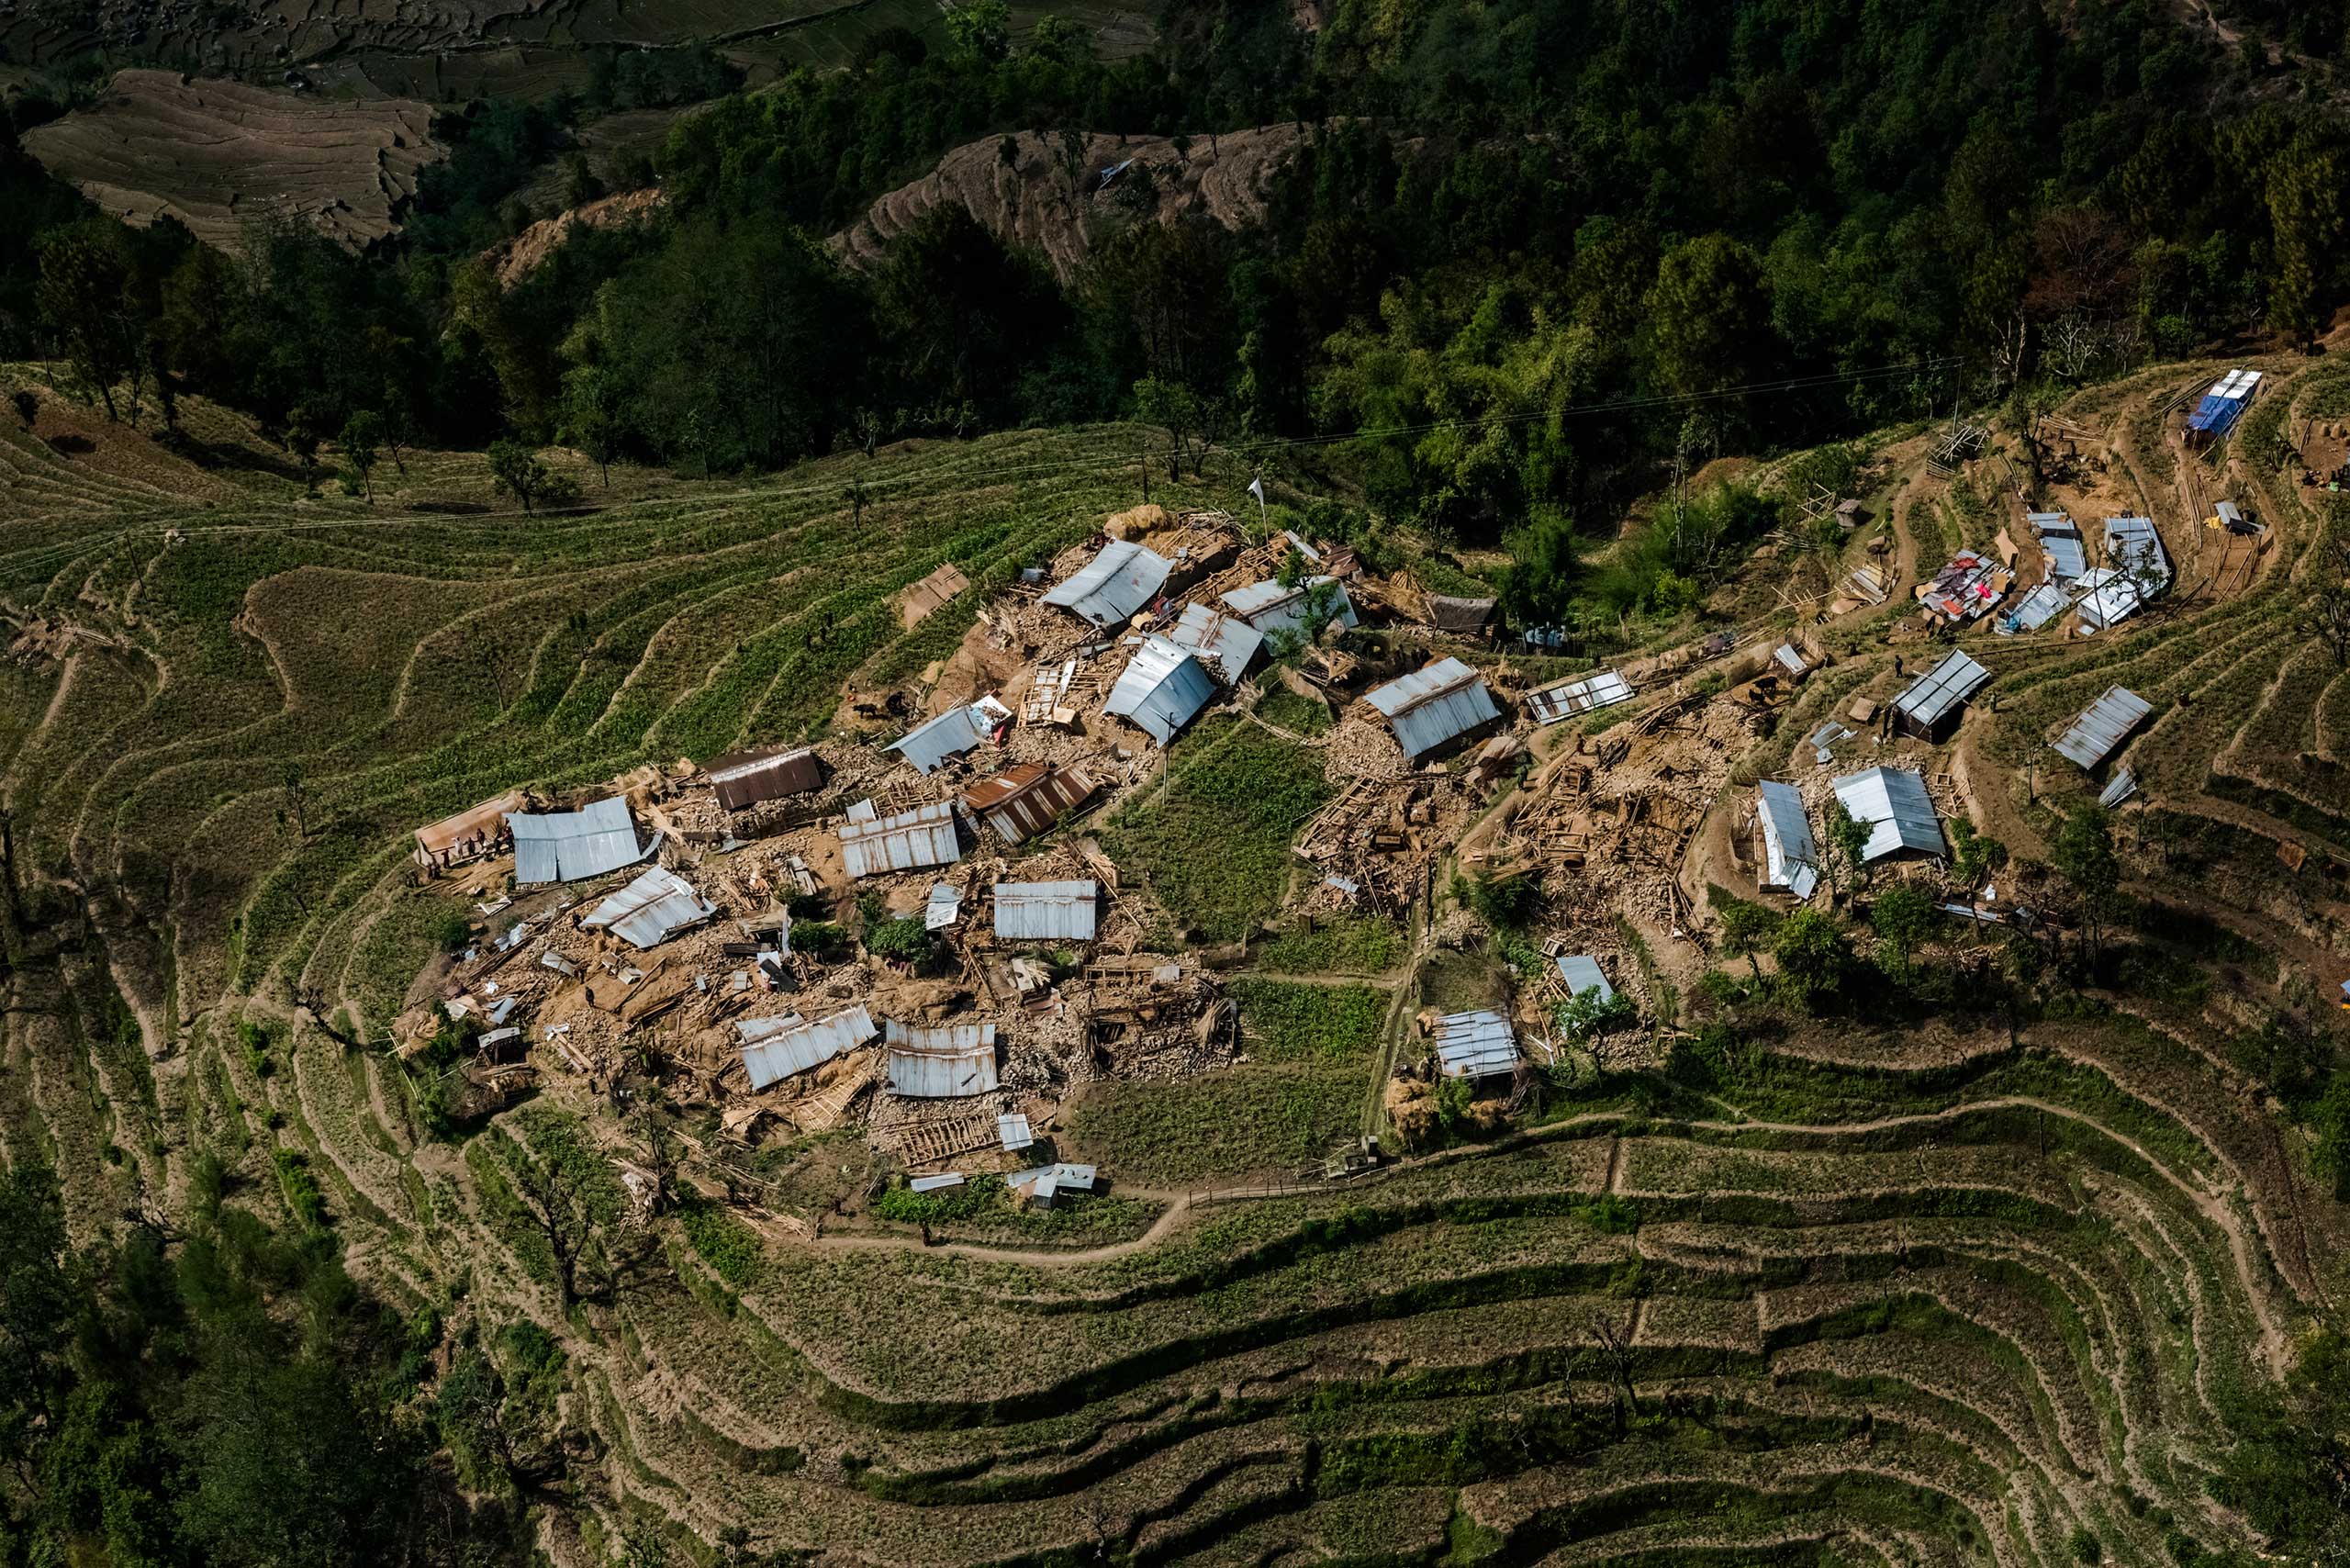 Earthquake-flattened homes are seen from an Indian military helicopter above a village in the Nuwakot district in Nepal. The helicopter was unable to find a stable or large enough area to land, so it hovered above the narrow hillside farmland, and army personnel threw food from the aircraft. May 1, 2015.